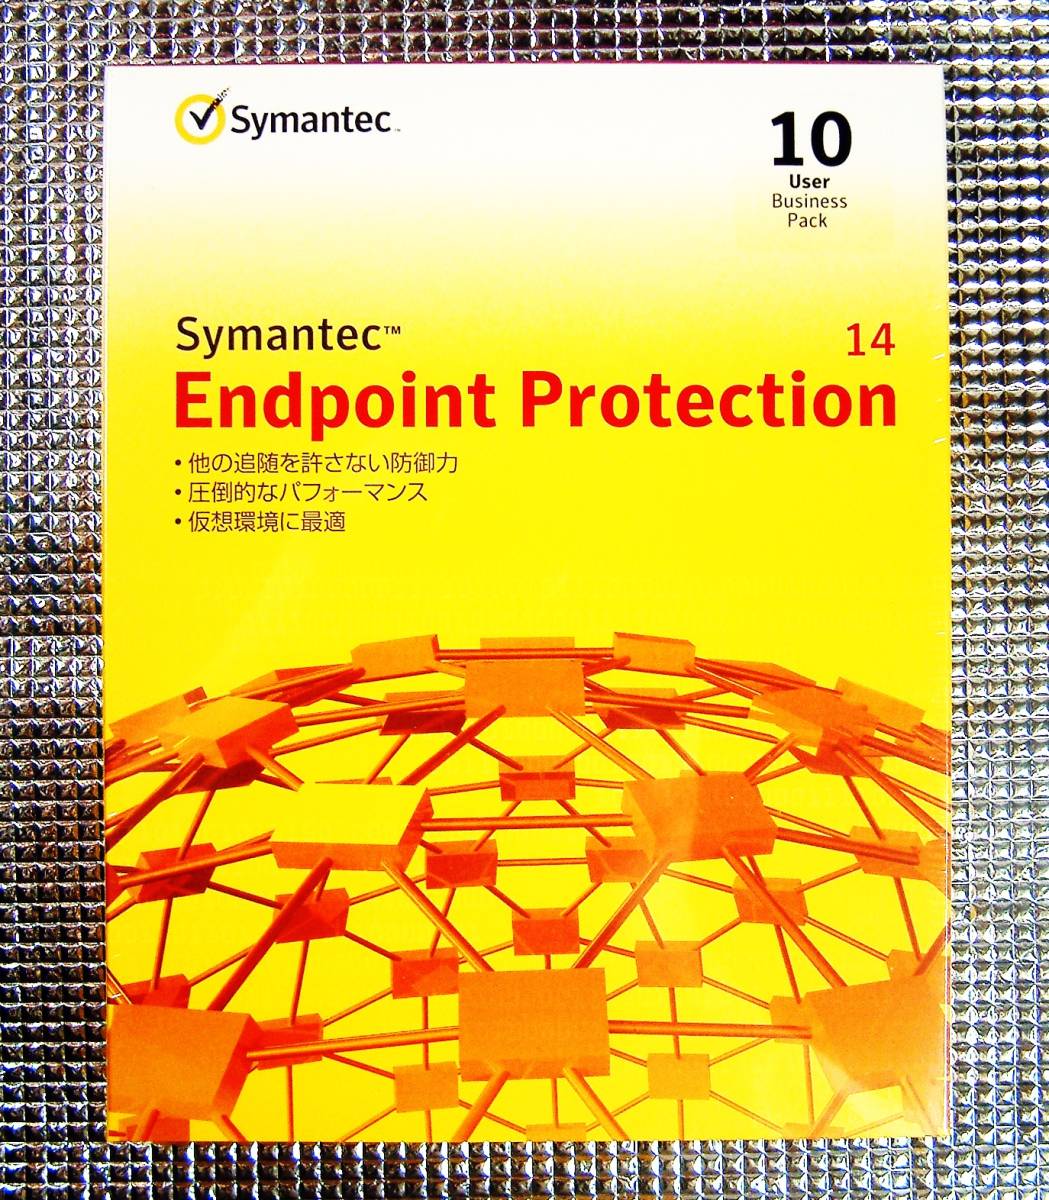 [4101B]Symantec Endpoint Protection 14 10user Business Pack unopened goods si man Tec end Point protection business pack 